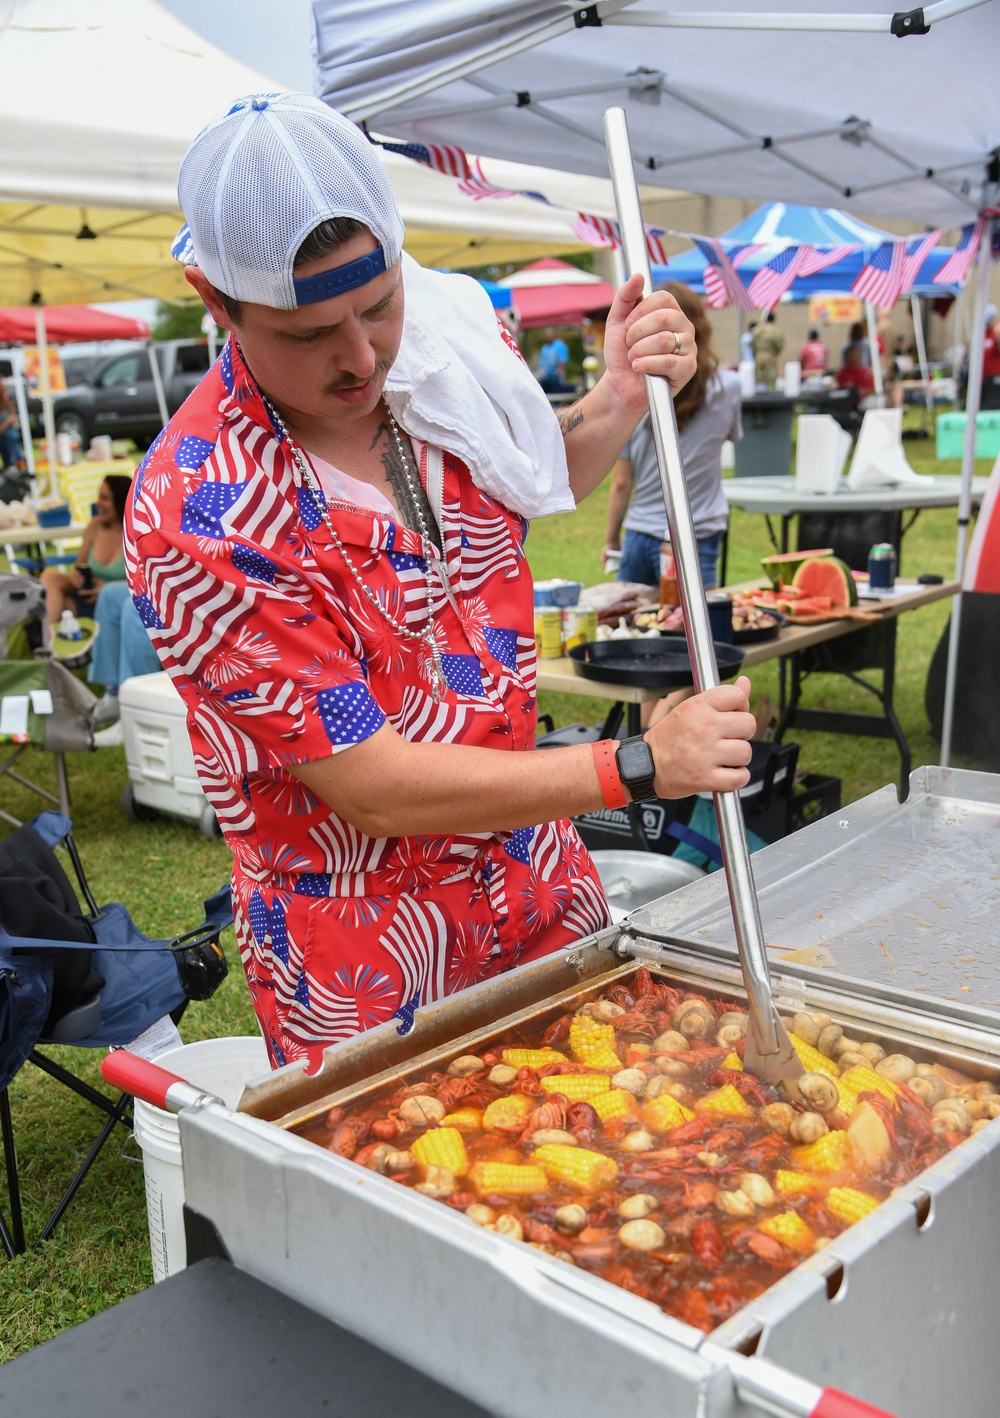 DVIDS Images 11th Annual Crawfish CookOff brings the heat [Image